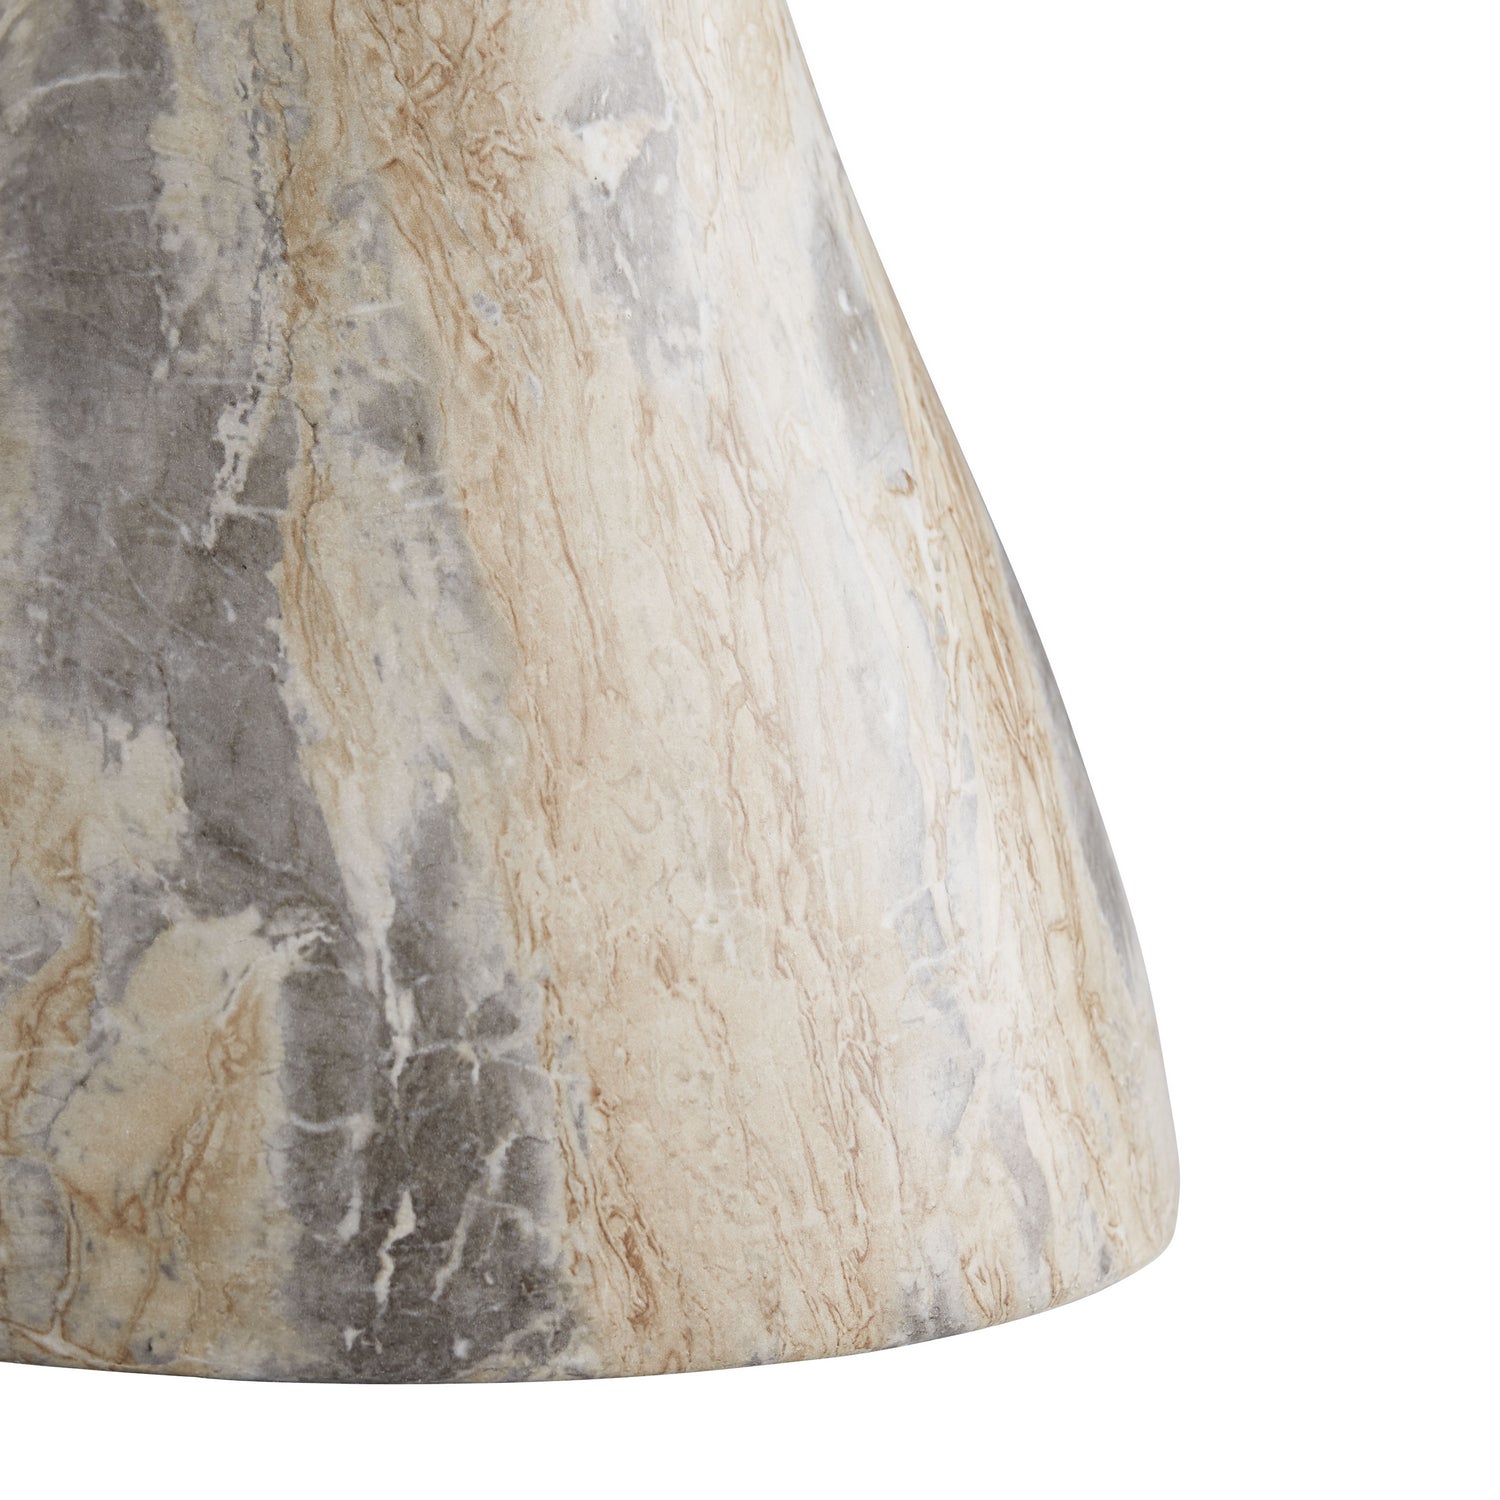 Accent Table from the Serafina collection in Sahara Faux Marble finish